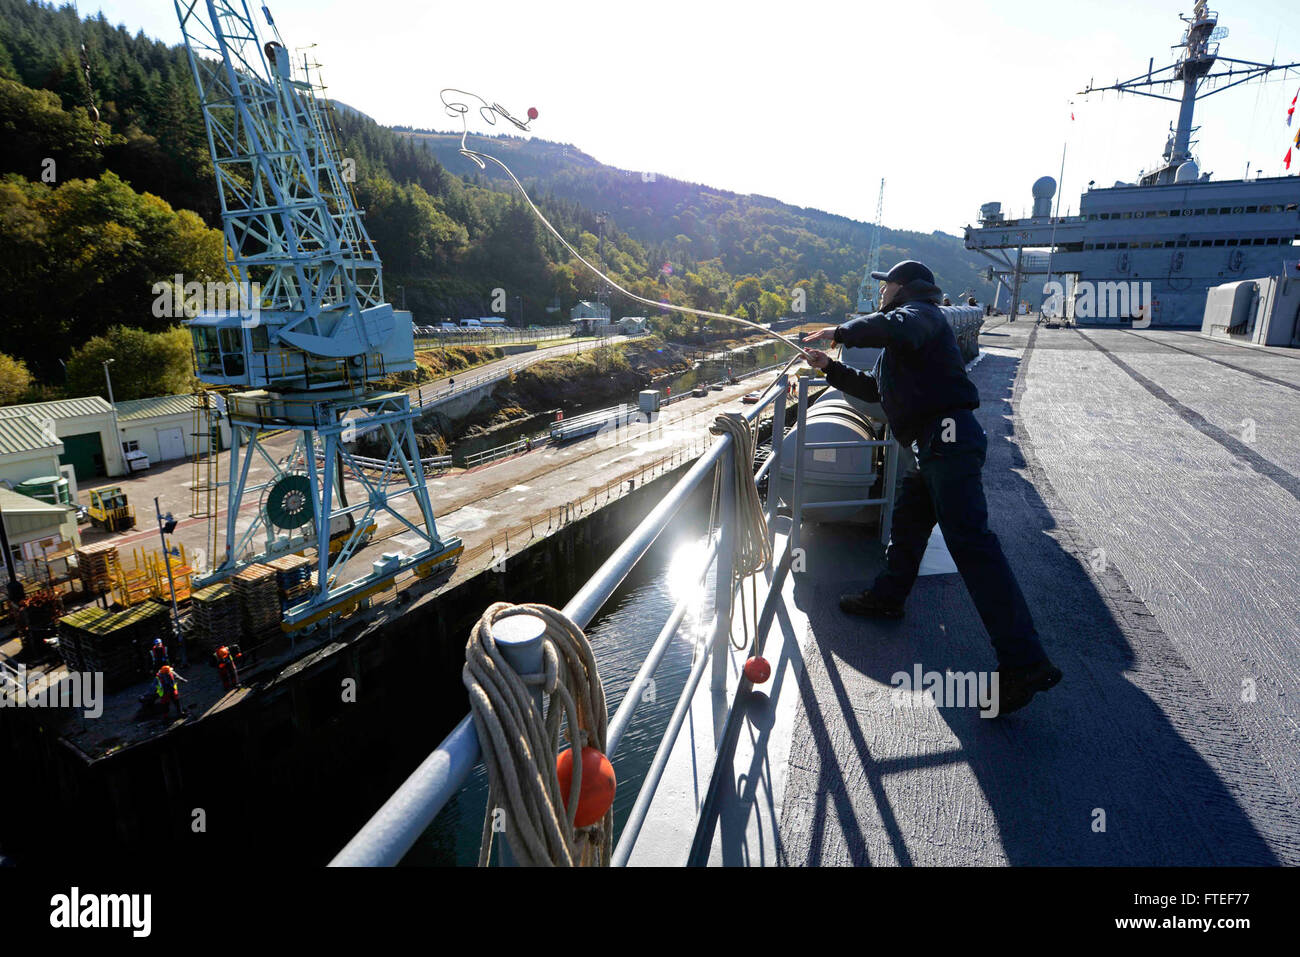 151017-N-VY489-189 GLENMALLAN, Scotland (Oct. 17, 2015) Civilian mariner able body seaman Aaron Mcclister throws a shot line to the pier as the U.S. 6th Fleet command and control ship USS Mount Whitney (LCC 20) is arrives in Glenmallan, Scotland, for a scheduled port visit. Mount Whitney, forward deployed to Gaeta, Italy, operates with a combined crew of Sailors and Military Sealift Command civil service mariners. (U.S. Navy photo by Mass Communication Specialist 1st Class Mike Wright/ Released) Stock Photo